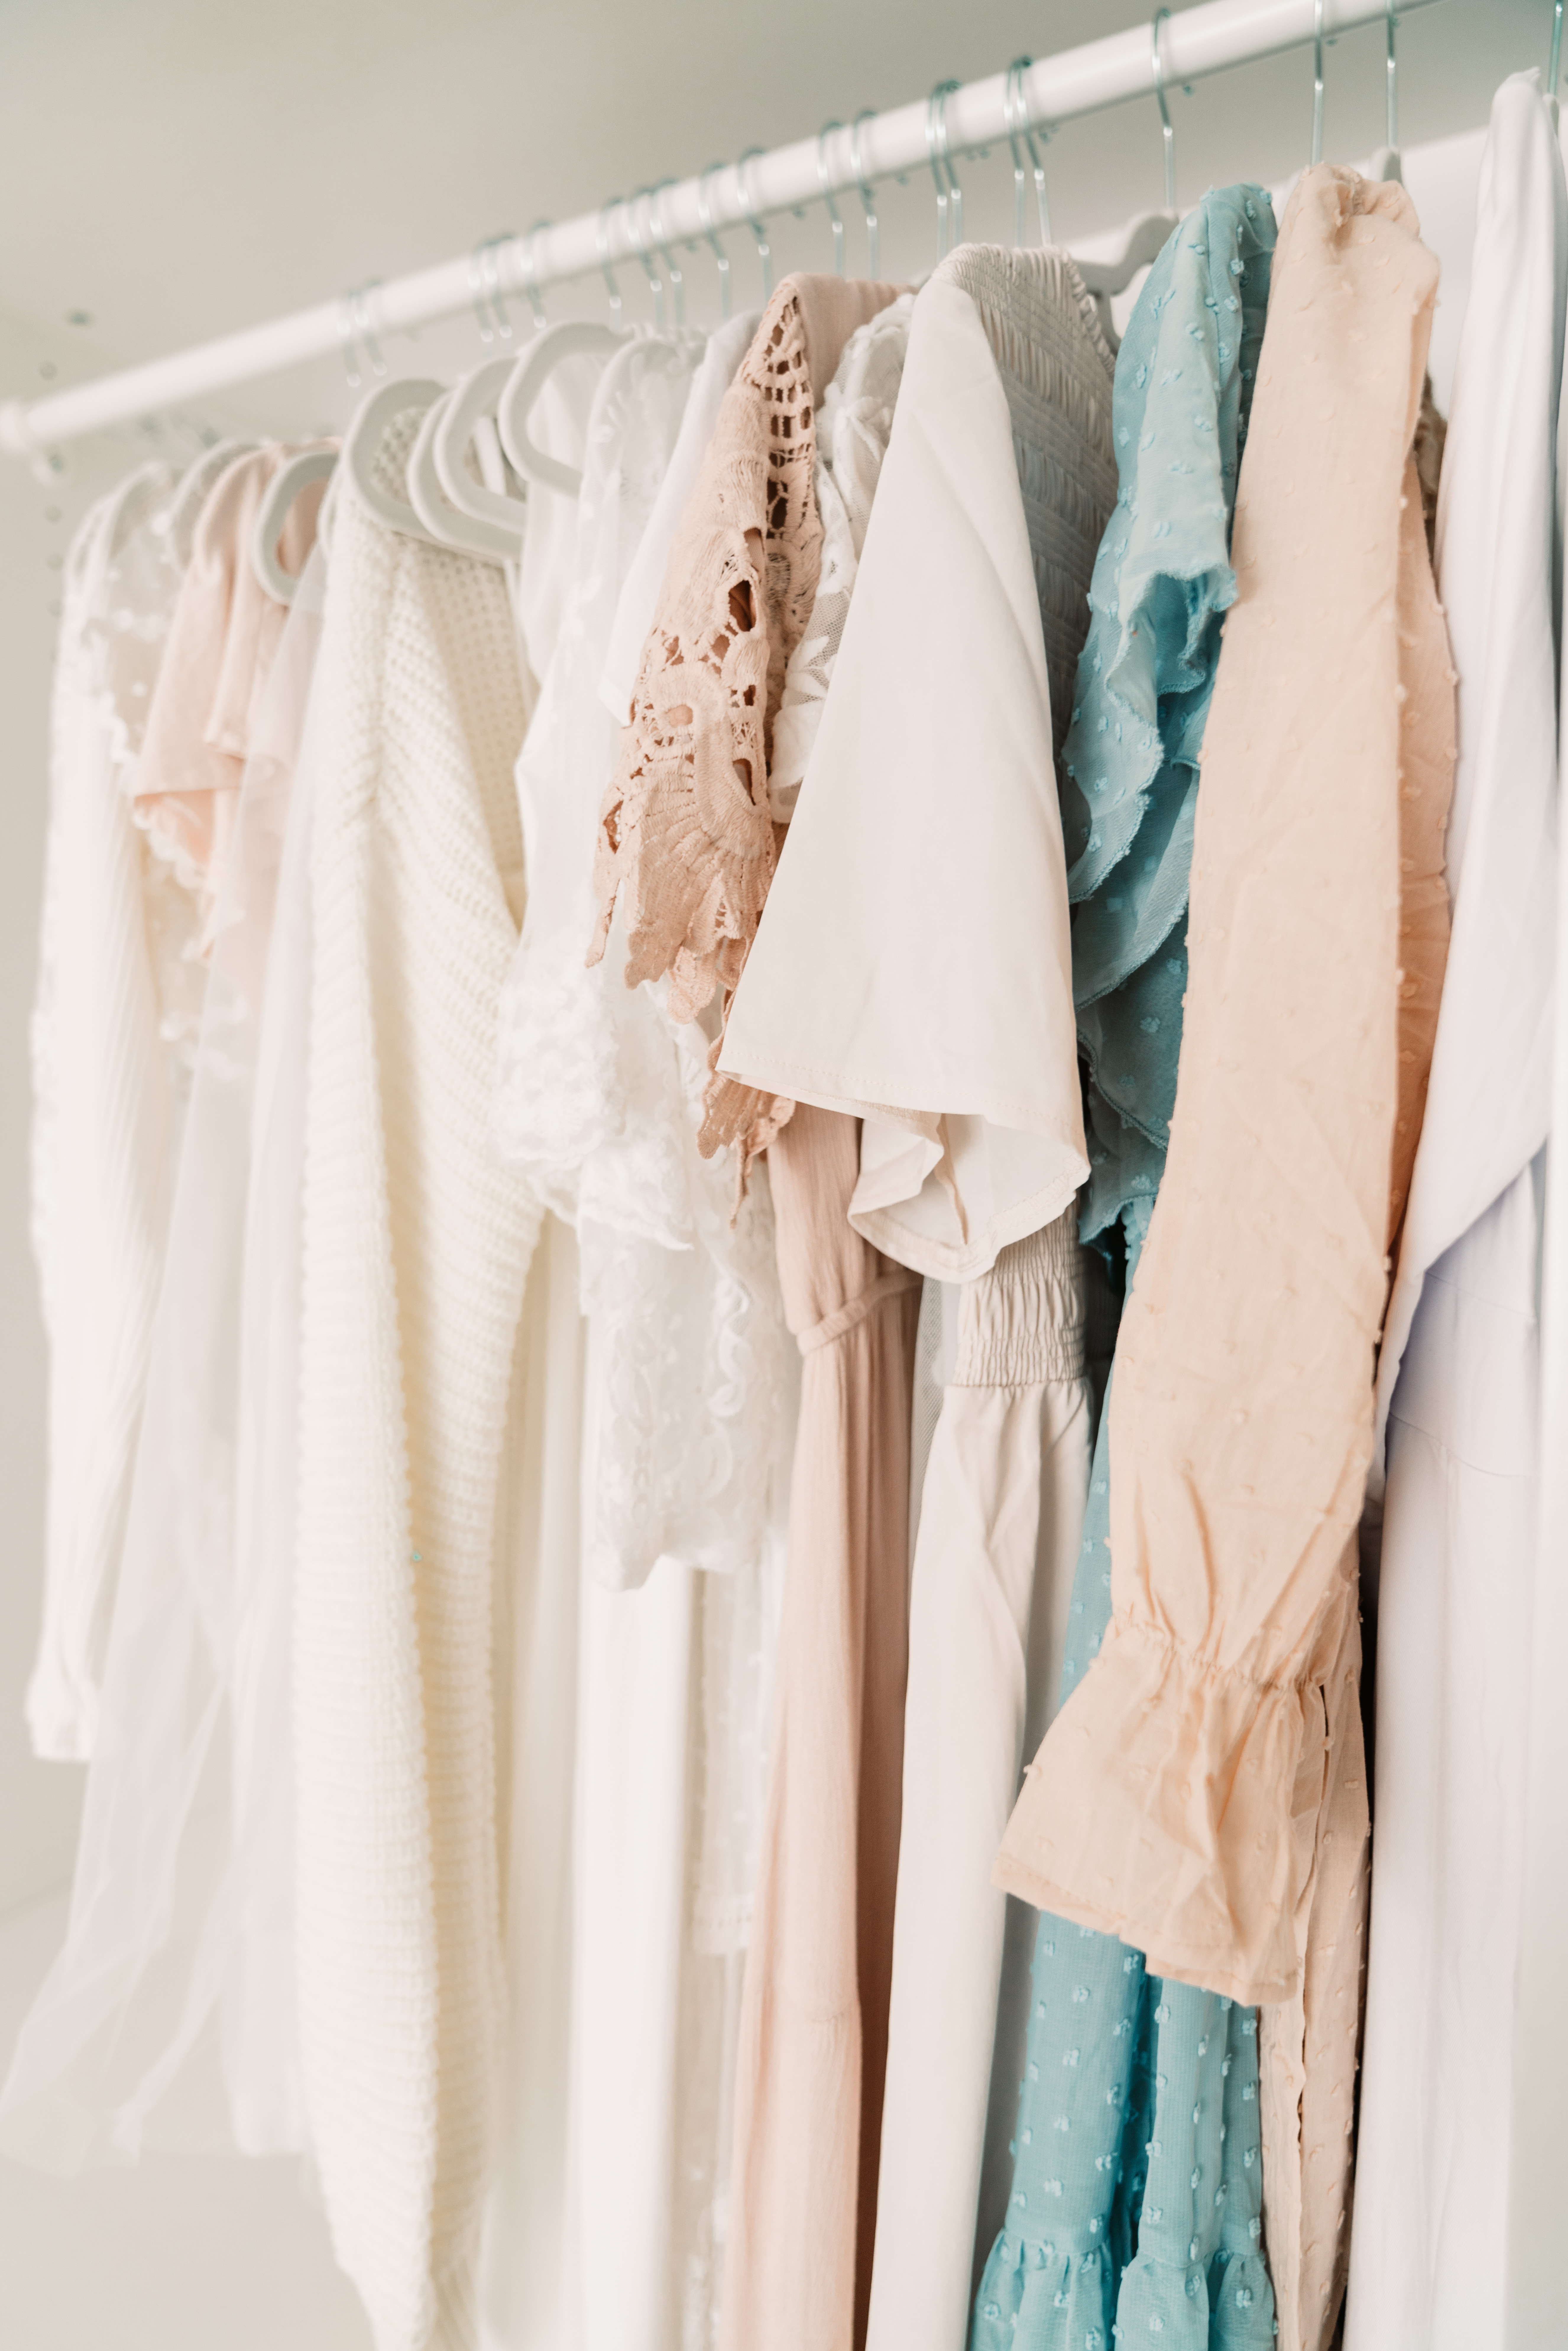 Photo of dresses hanging on a rack Prepare for a Successful Newborn Photoshoot